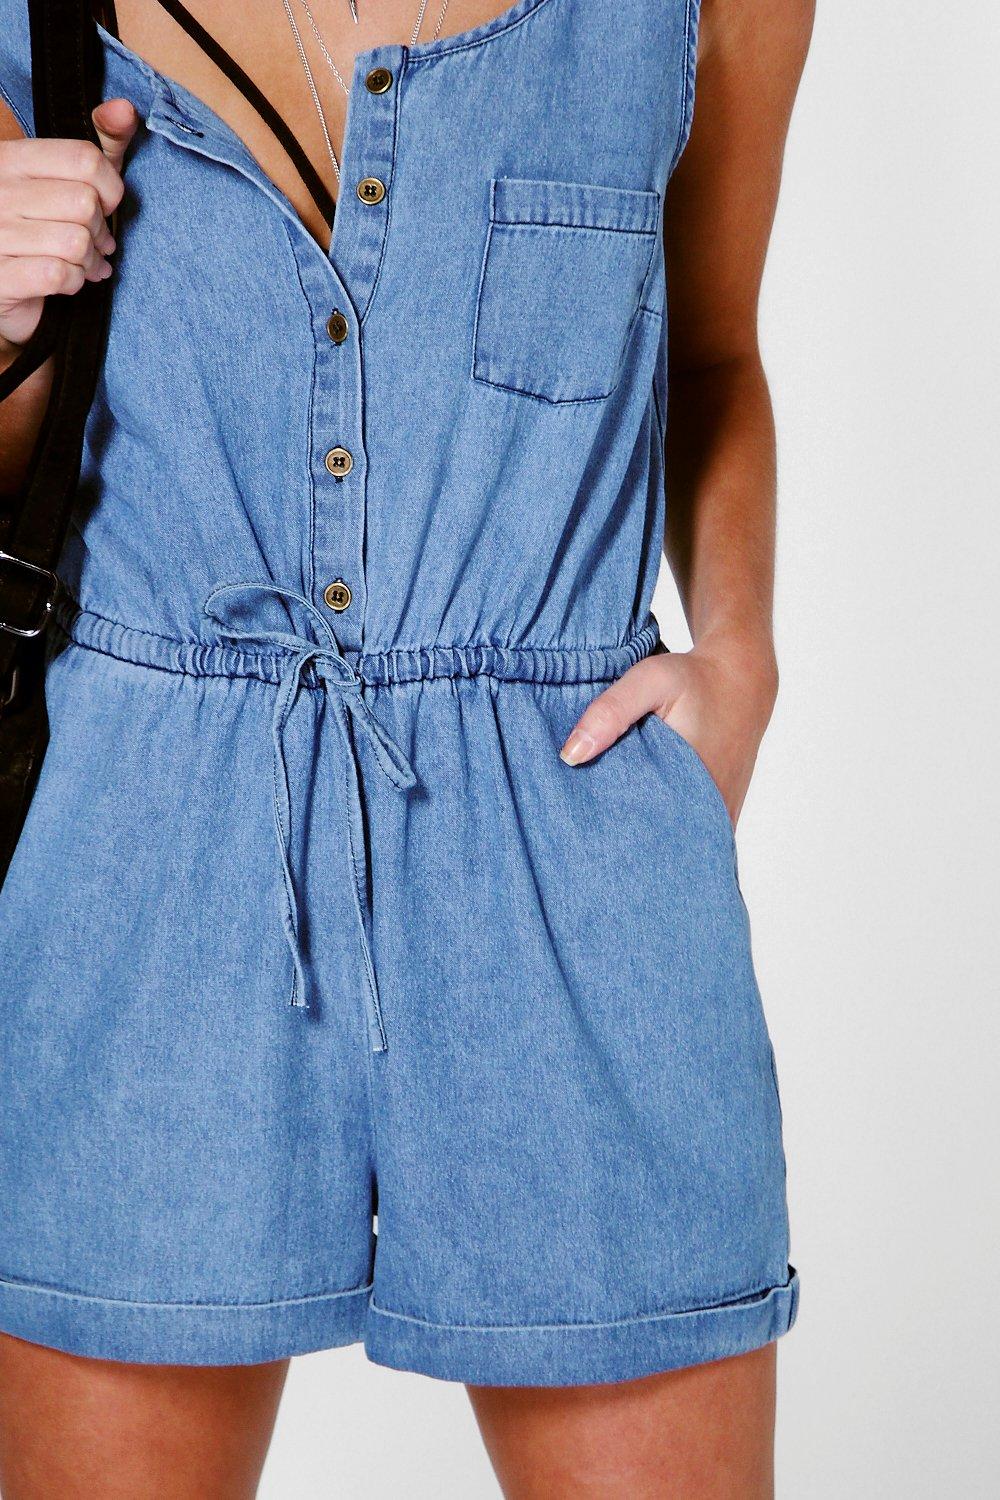 in the style denim playsuit